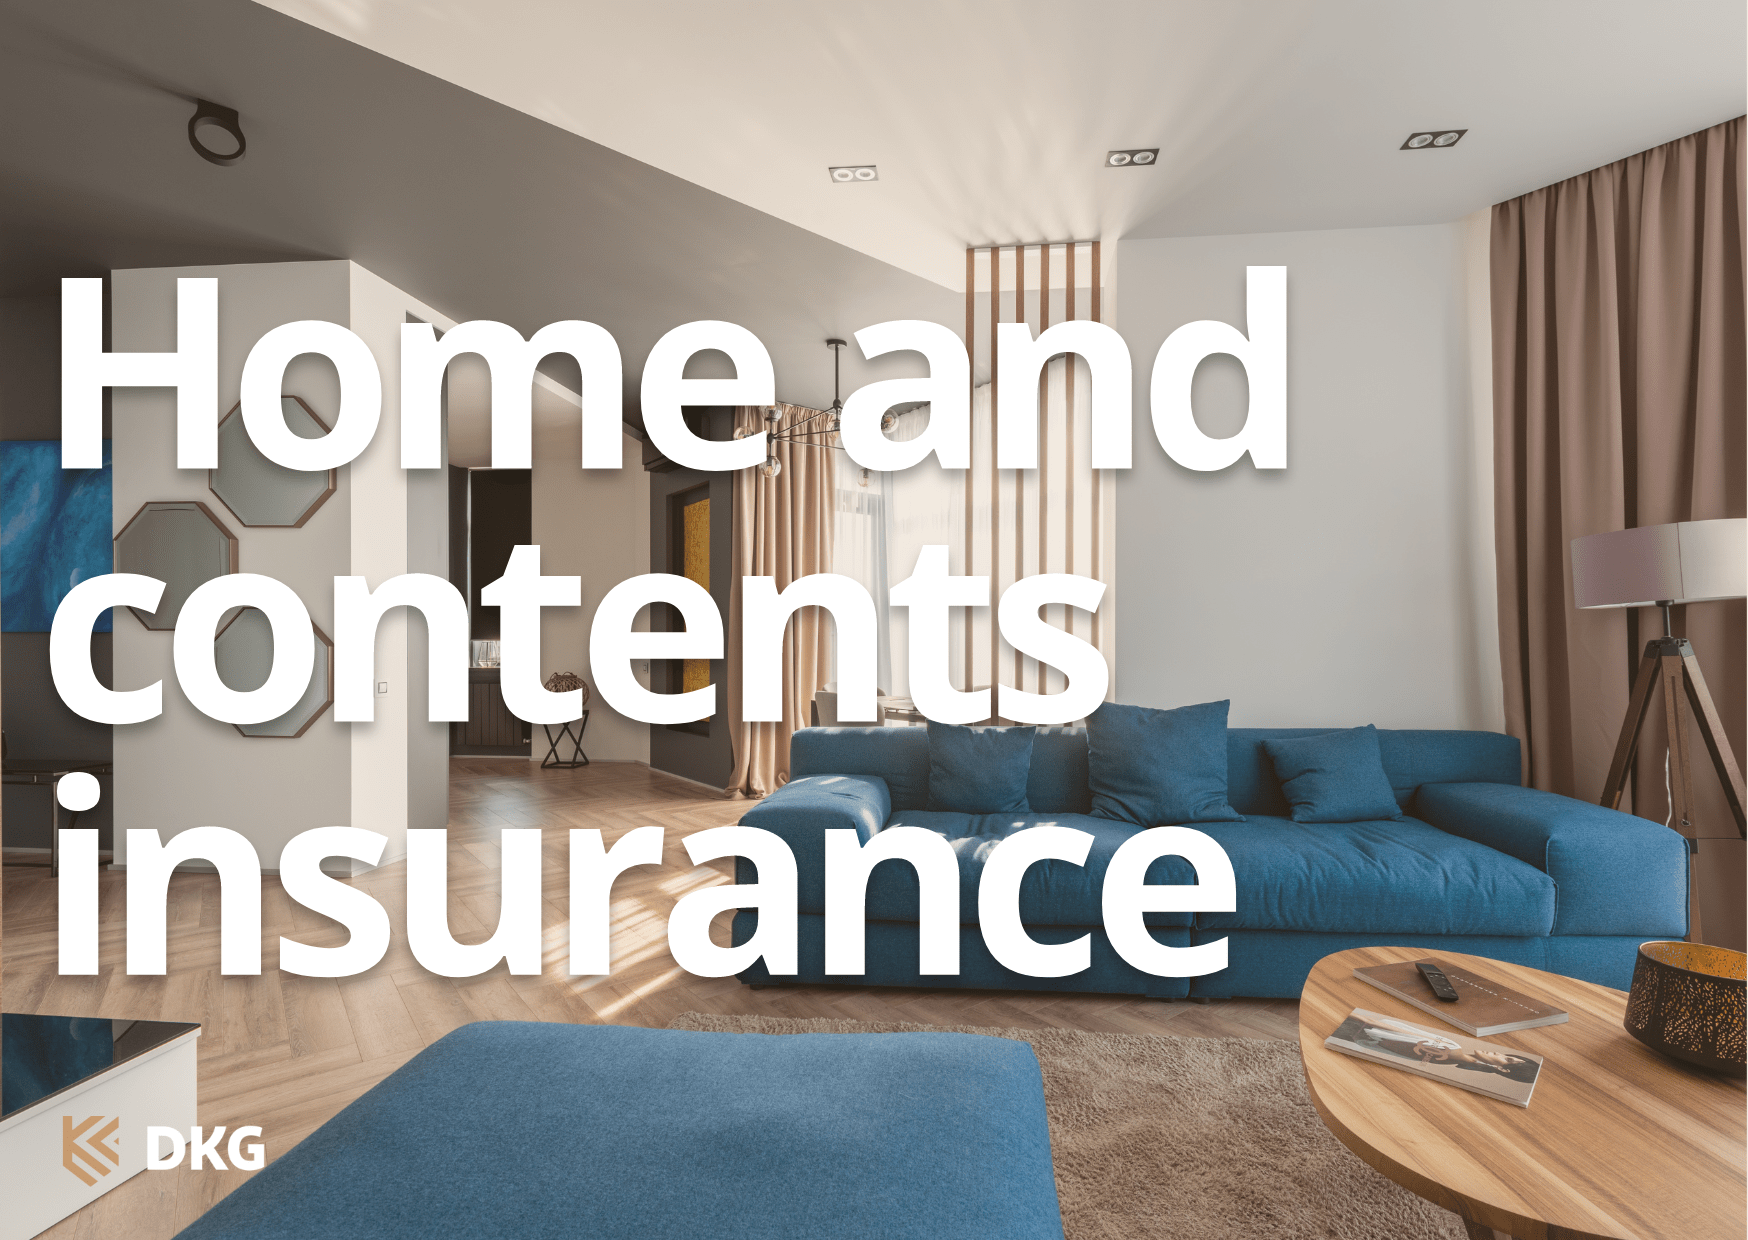 Image of a contemporary living room with the heading home and contents insurance